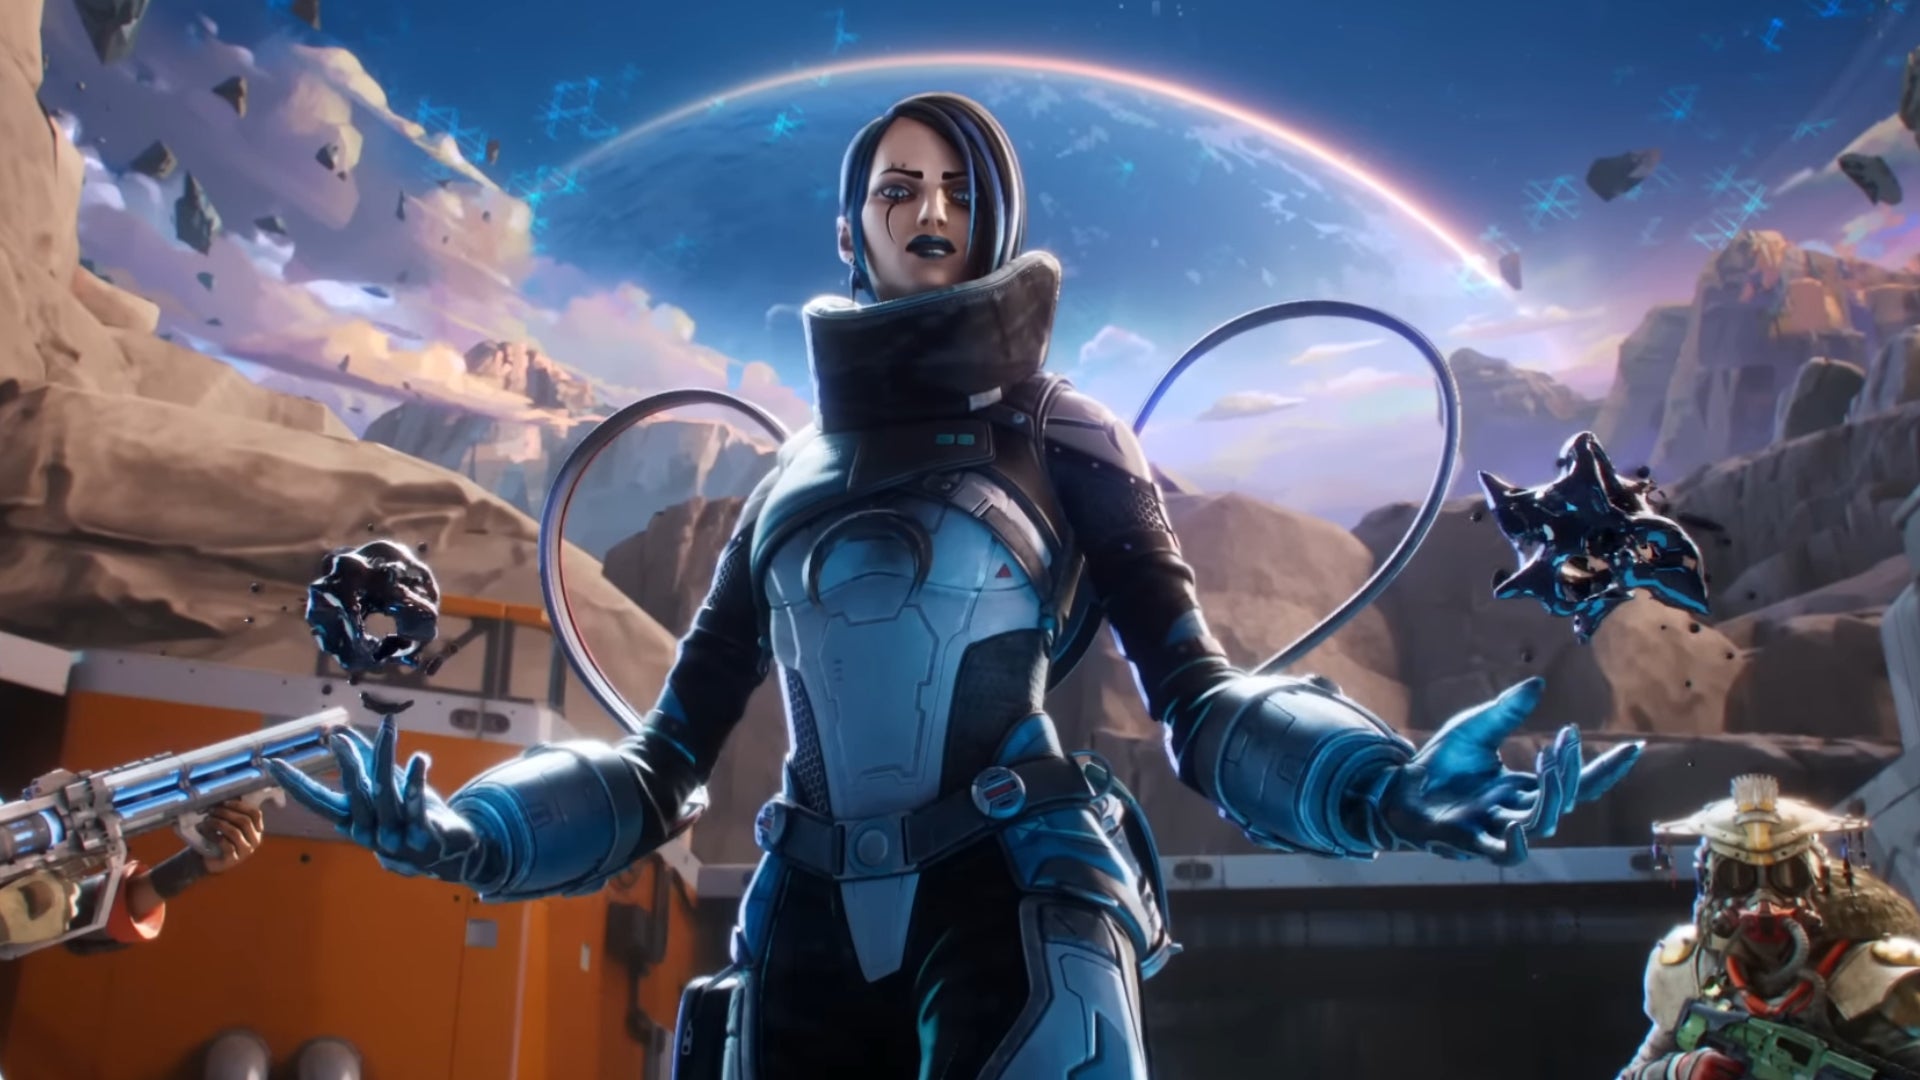 Catalyst, a Legend in Apex Legends, stands in front of the camera with her team, holding two balls of Ferrofluid.